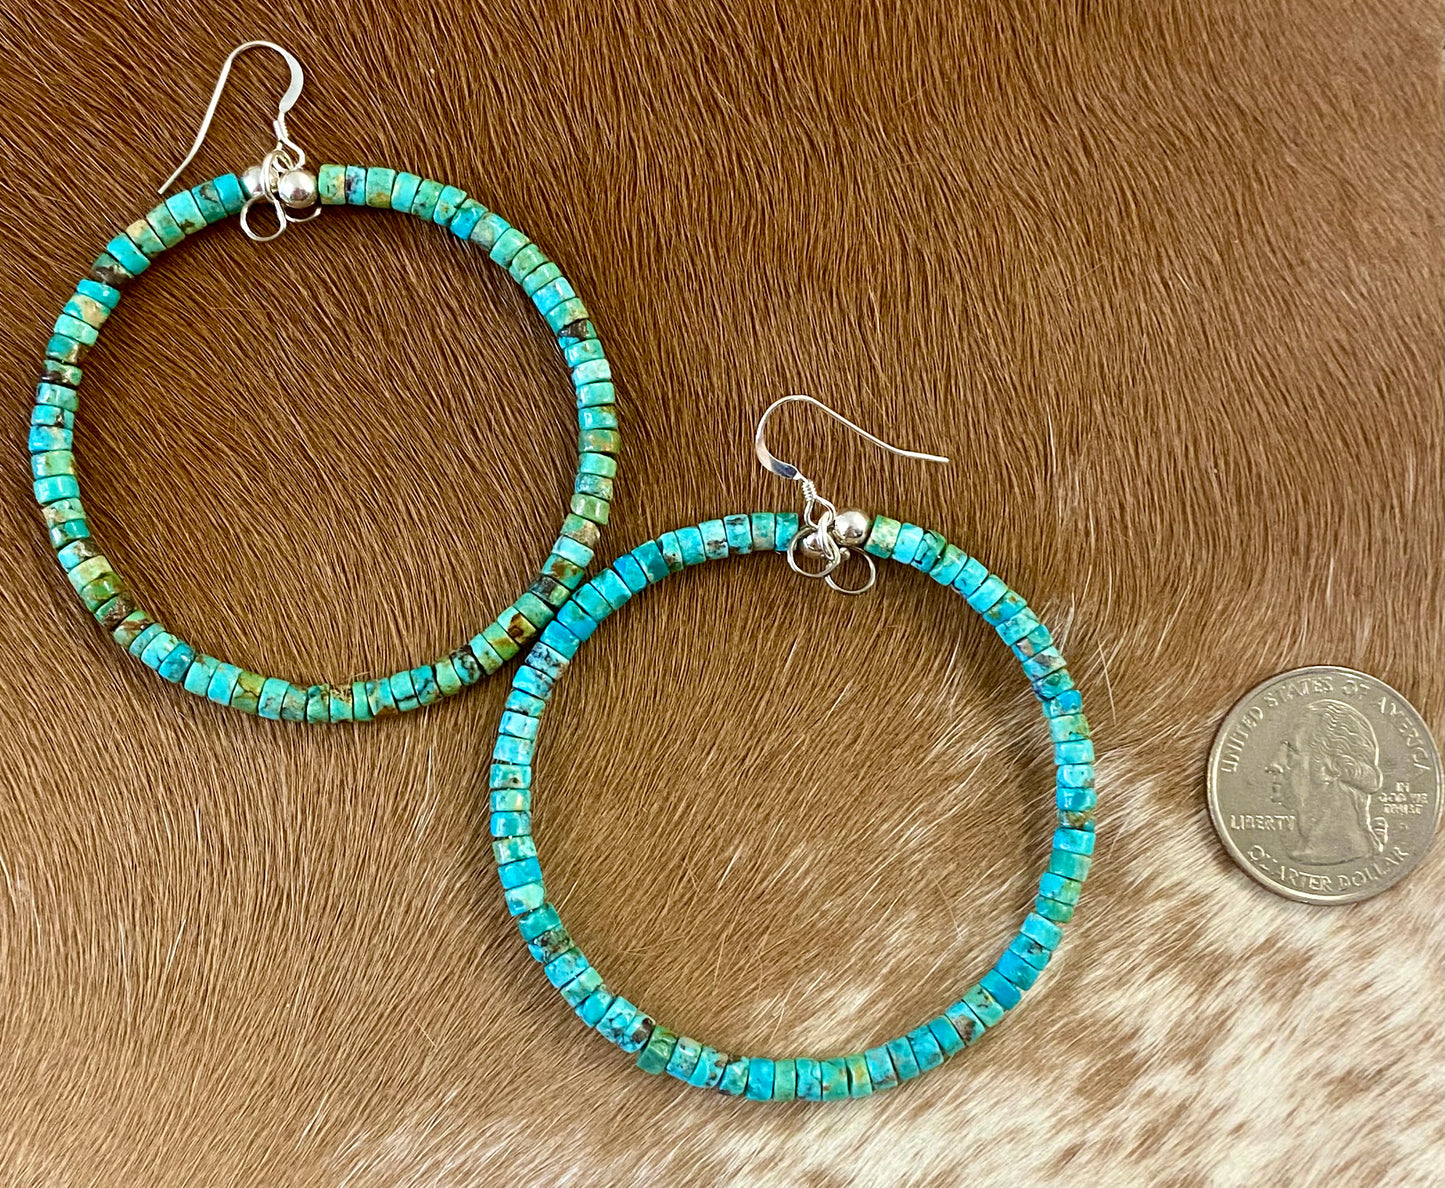 Stunning lightweight fun simple sterling silver turquoise Native made hoop earrings. The perfect everyday or dress up earrings.   Size: 2.25” inches length x 2.25” Inches width   Stone: Turquoise 